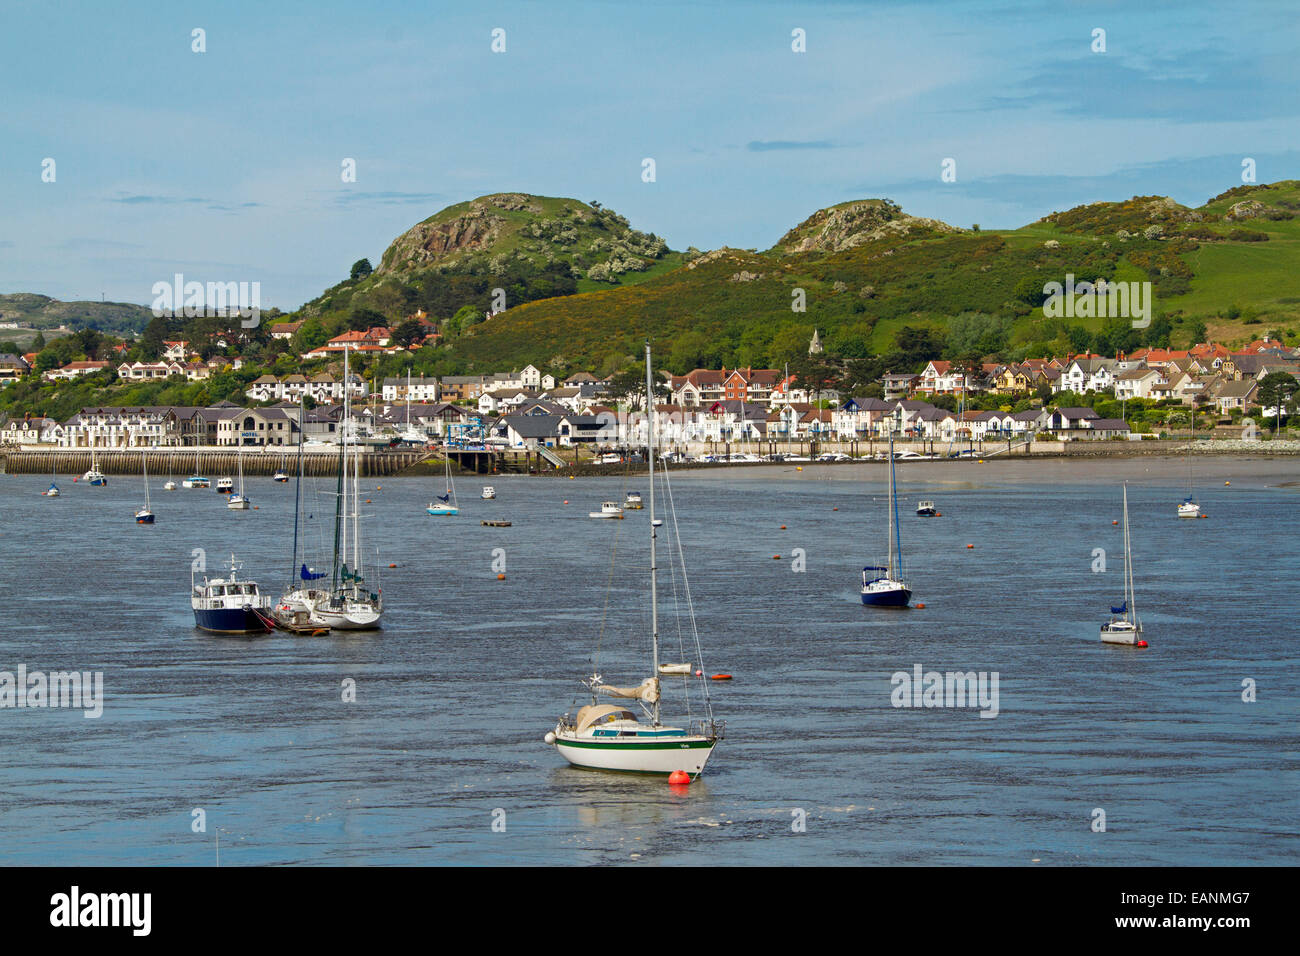 Boats moored on calm blue water of estuary of Conwy River with buildings of Welsh town of Conwy at base of adjacent hill Stock Photo